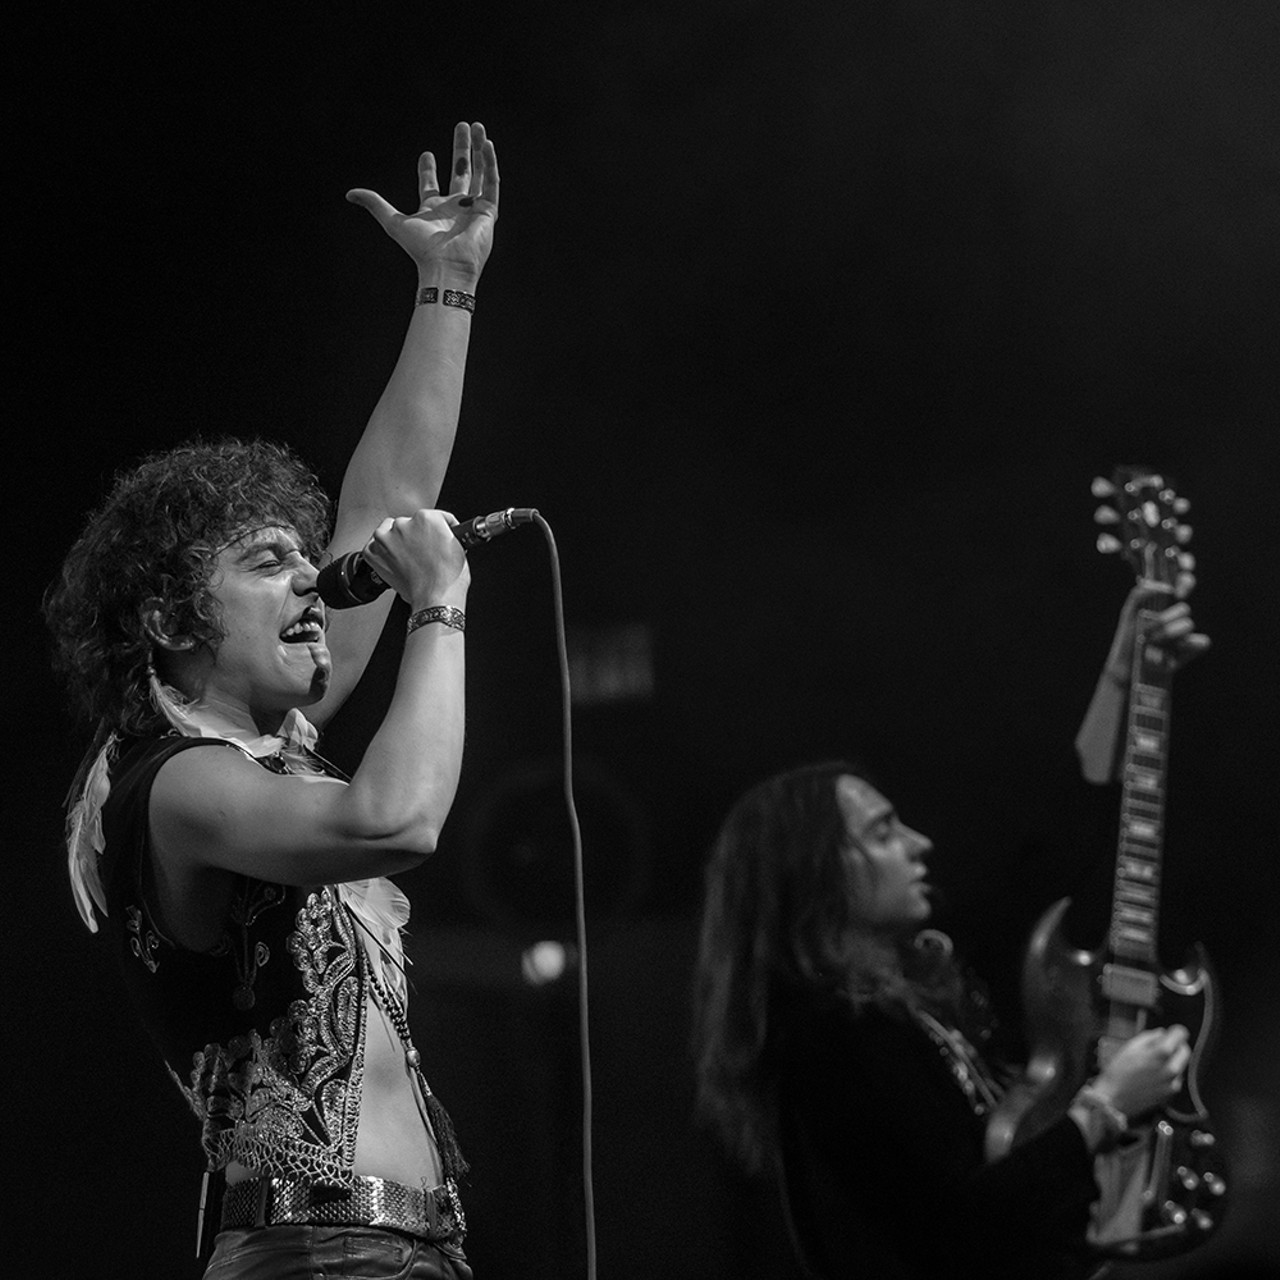 Photos from Greta Van Fleet's sold-out shows at Detroit's Fox Theatre